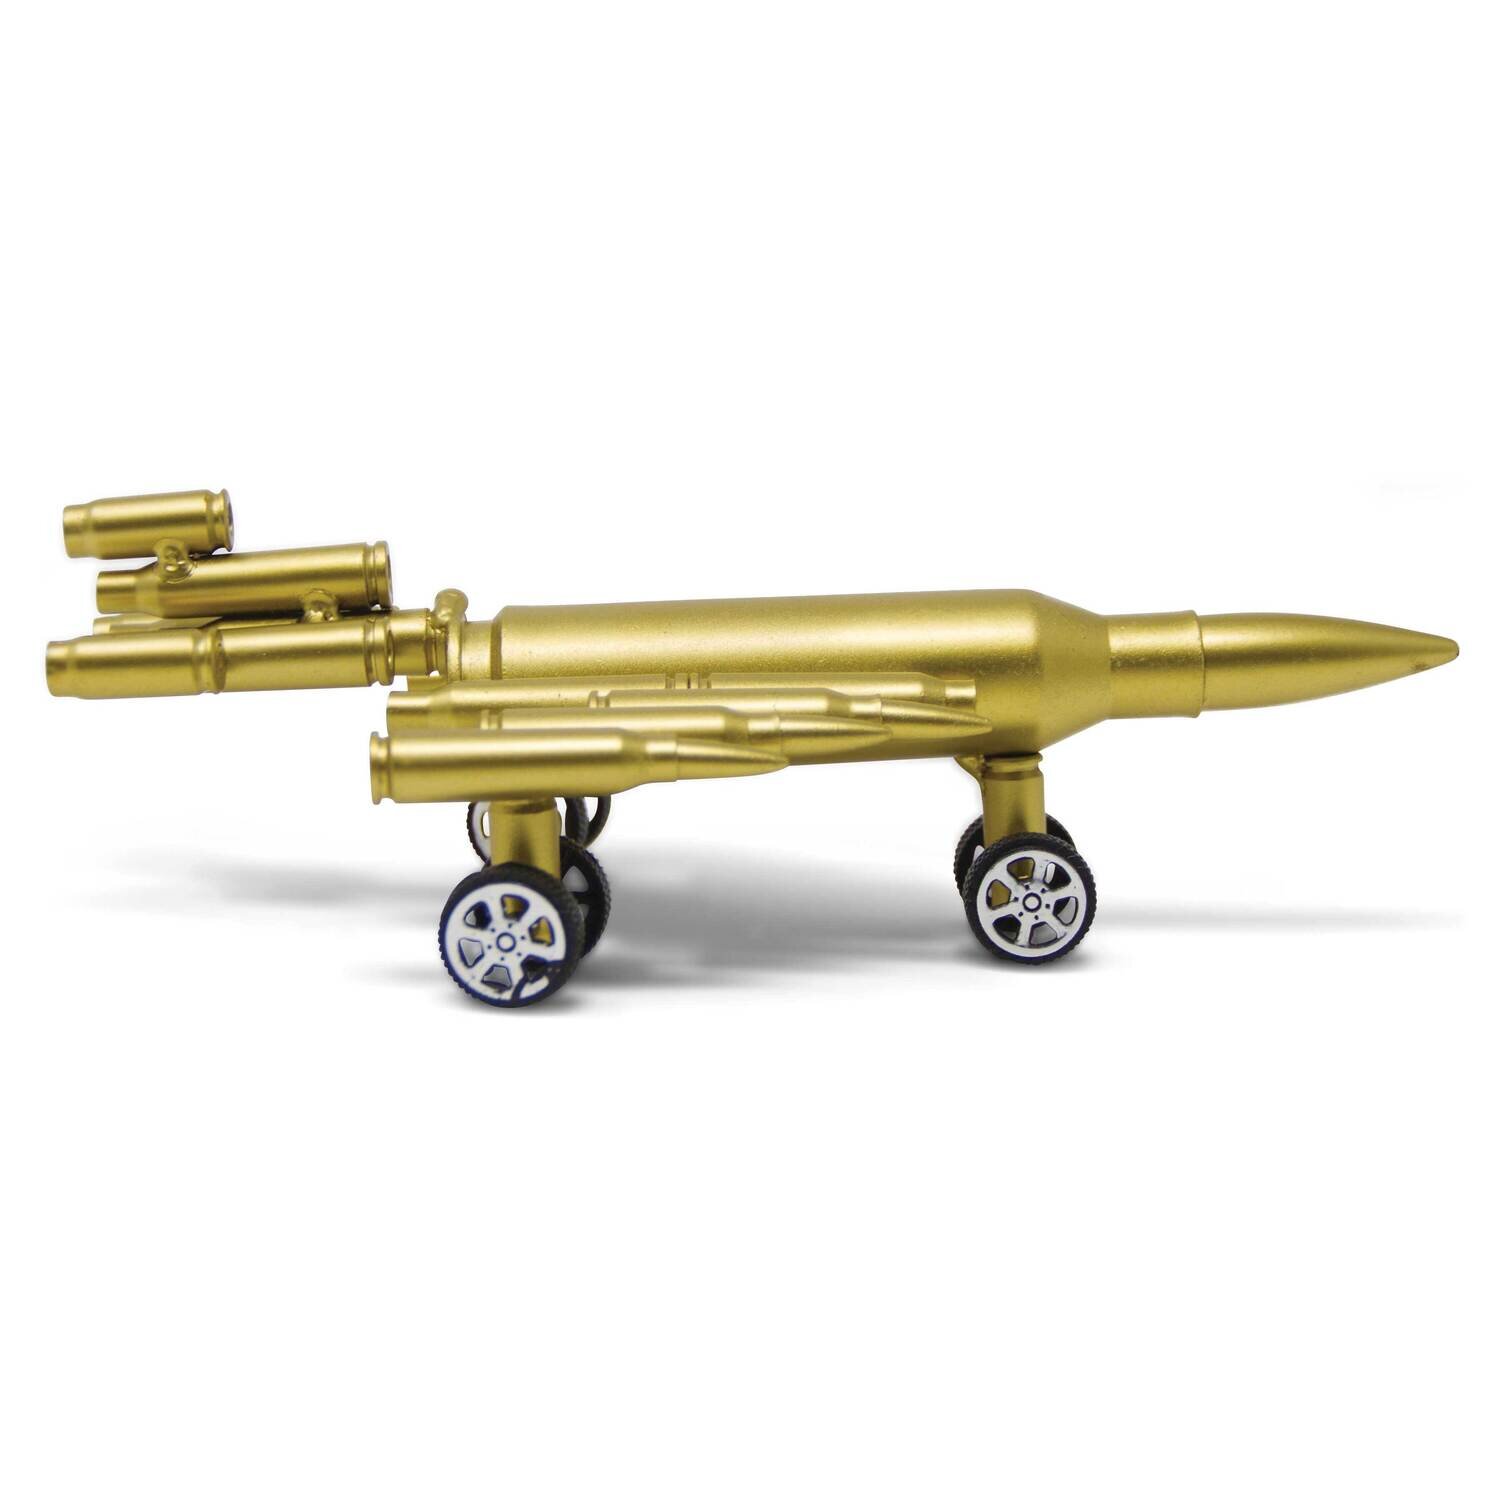 Model Plane Made with Real Bullet Casings GM22594